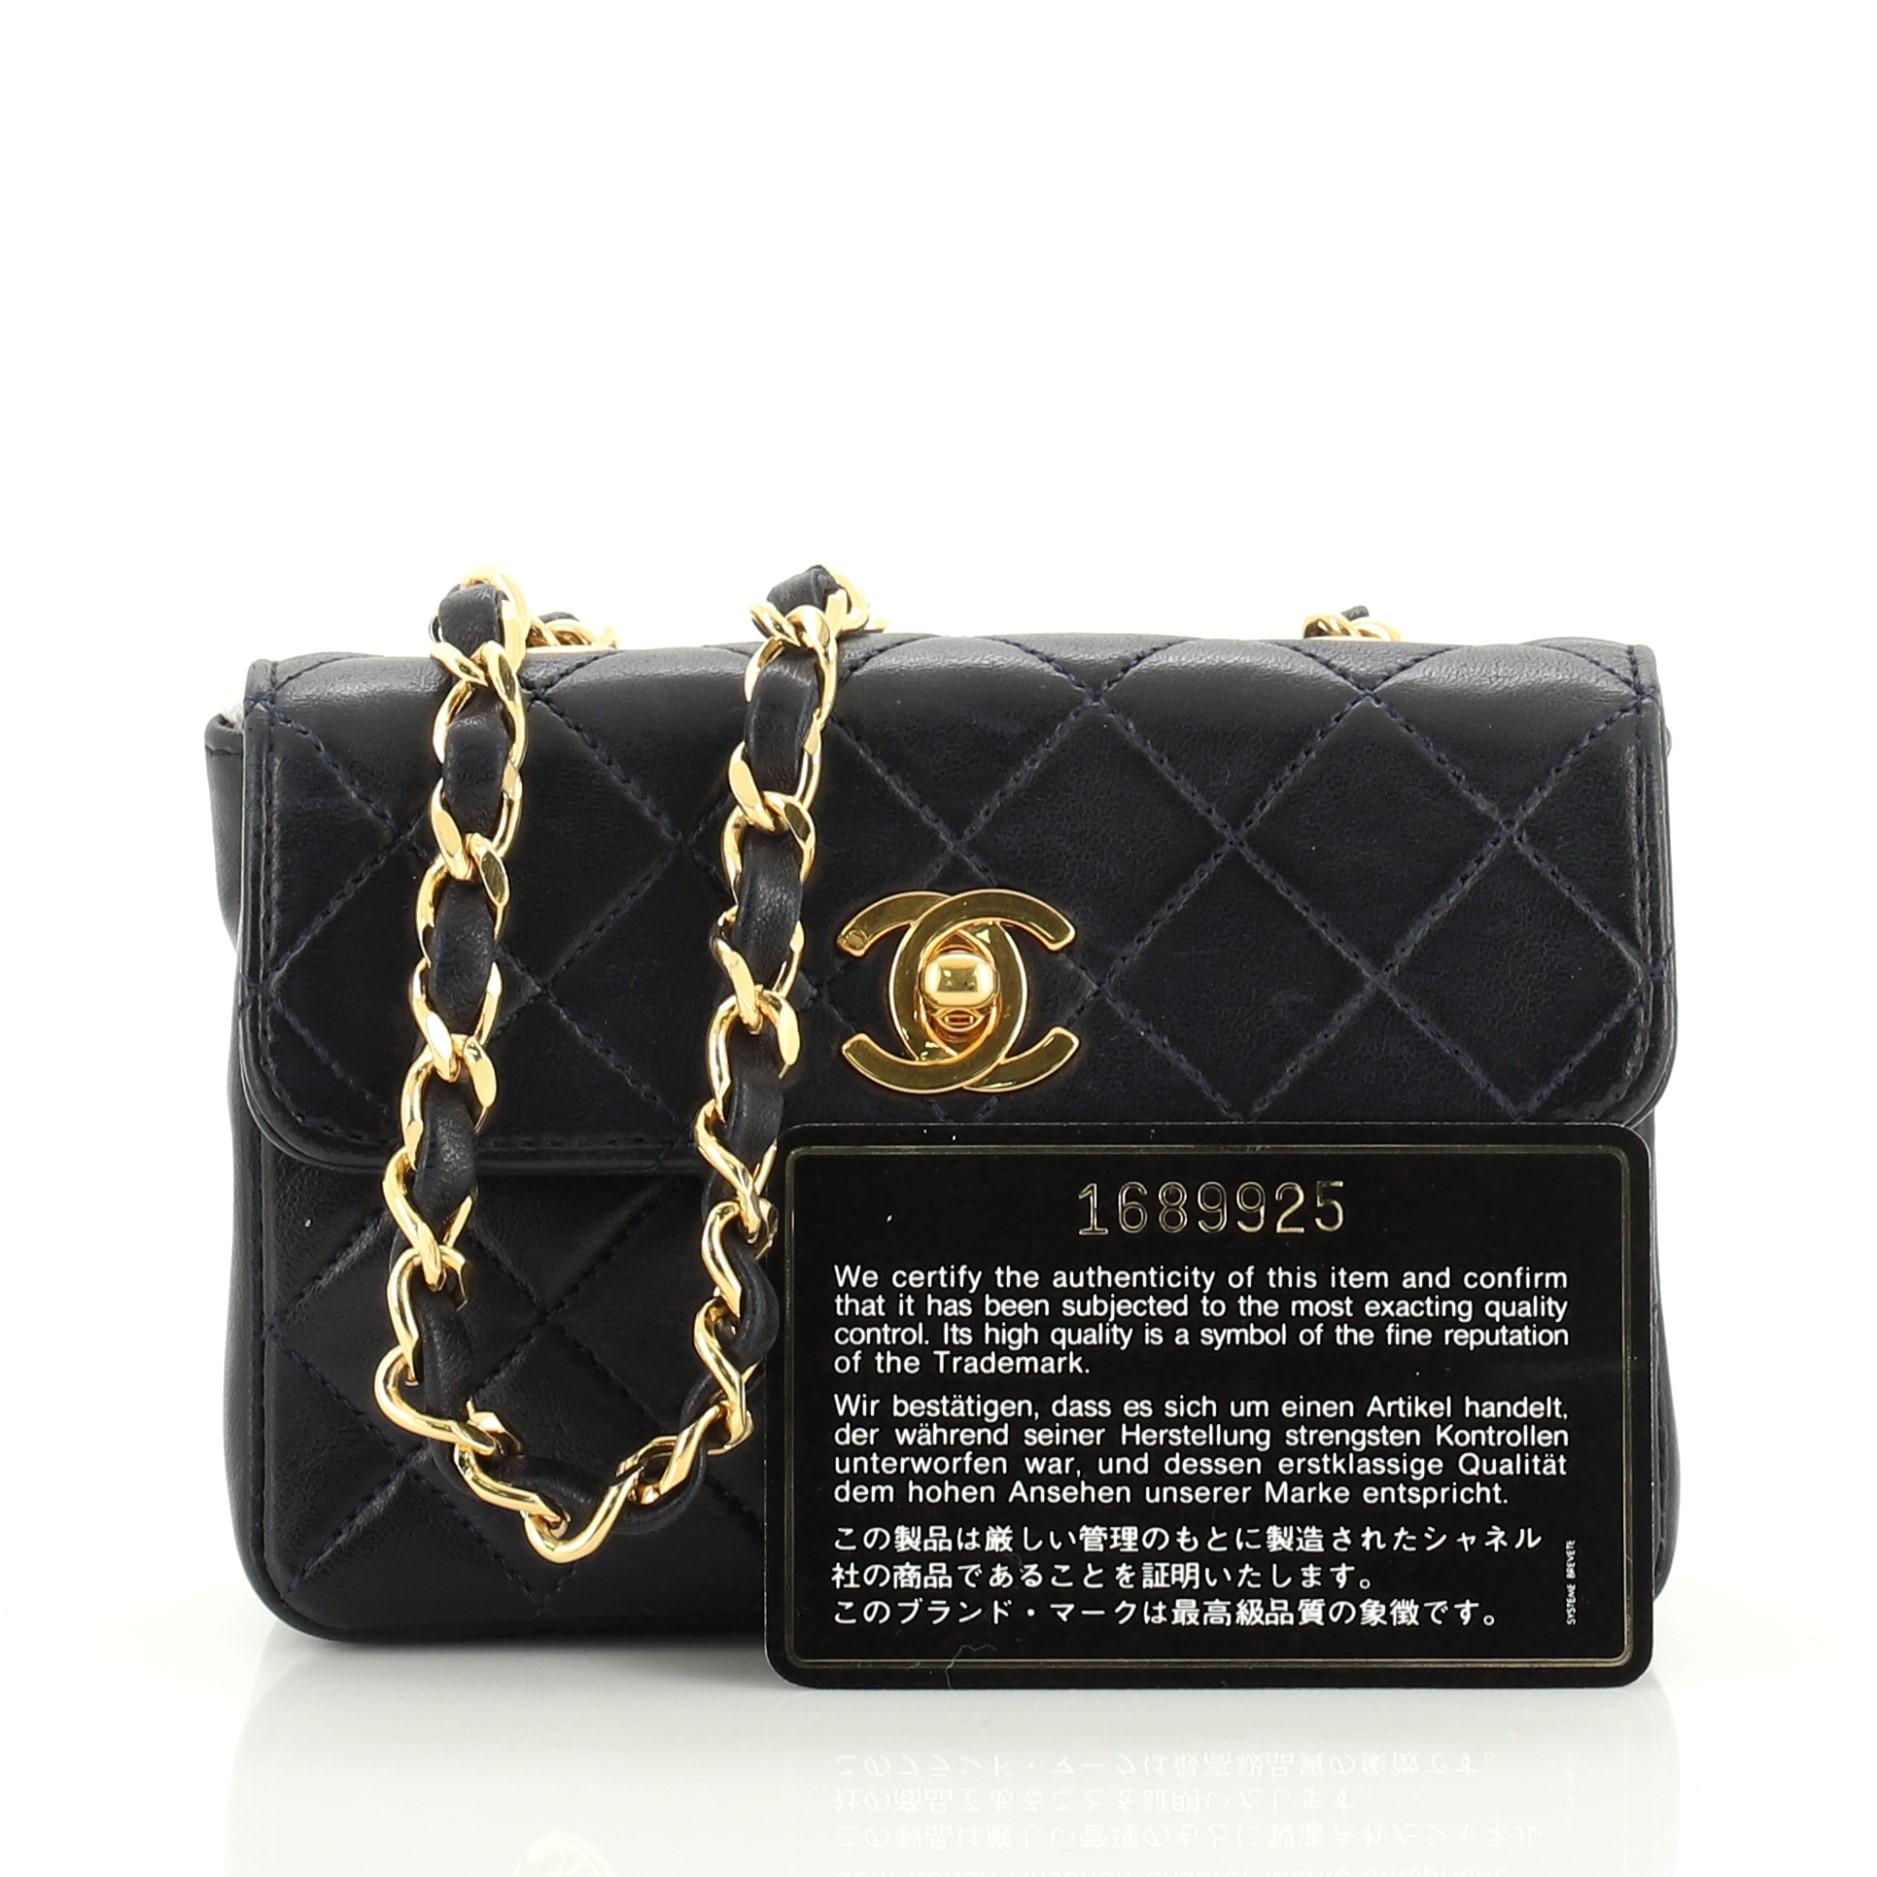 This Chanel Vintage CC Chain Flap Bag Quilted Leather Extra Mini, crafted from blue quilted leather, features woven-in leather chain link strap and gold-tone hardware. Its CC turn-lock closure opens to a red leather interior. Hologram sticker reads: